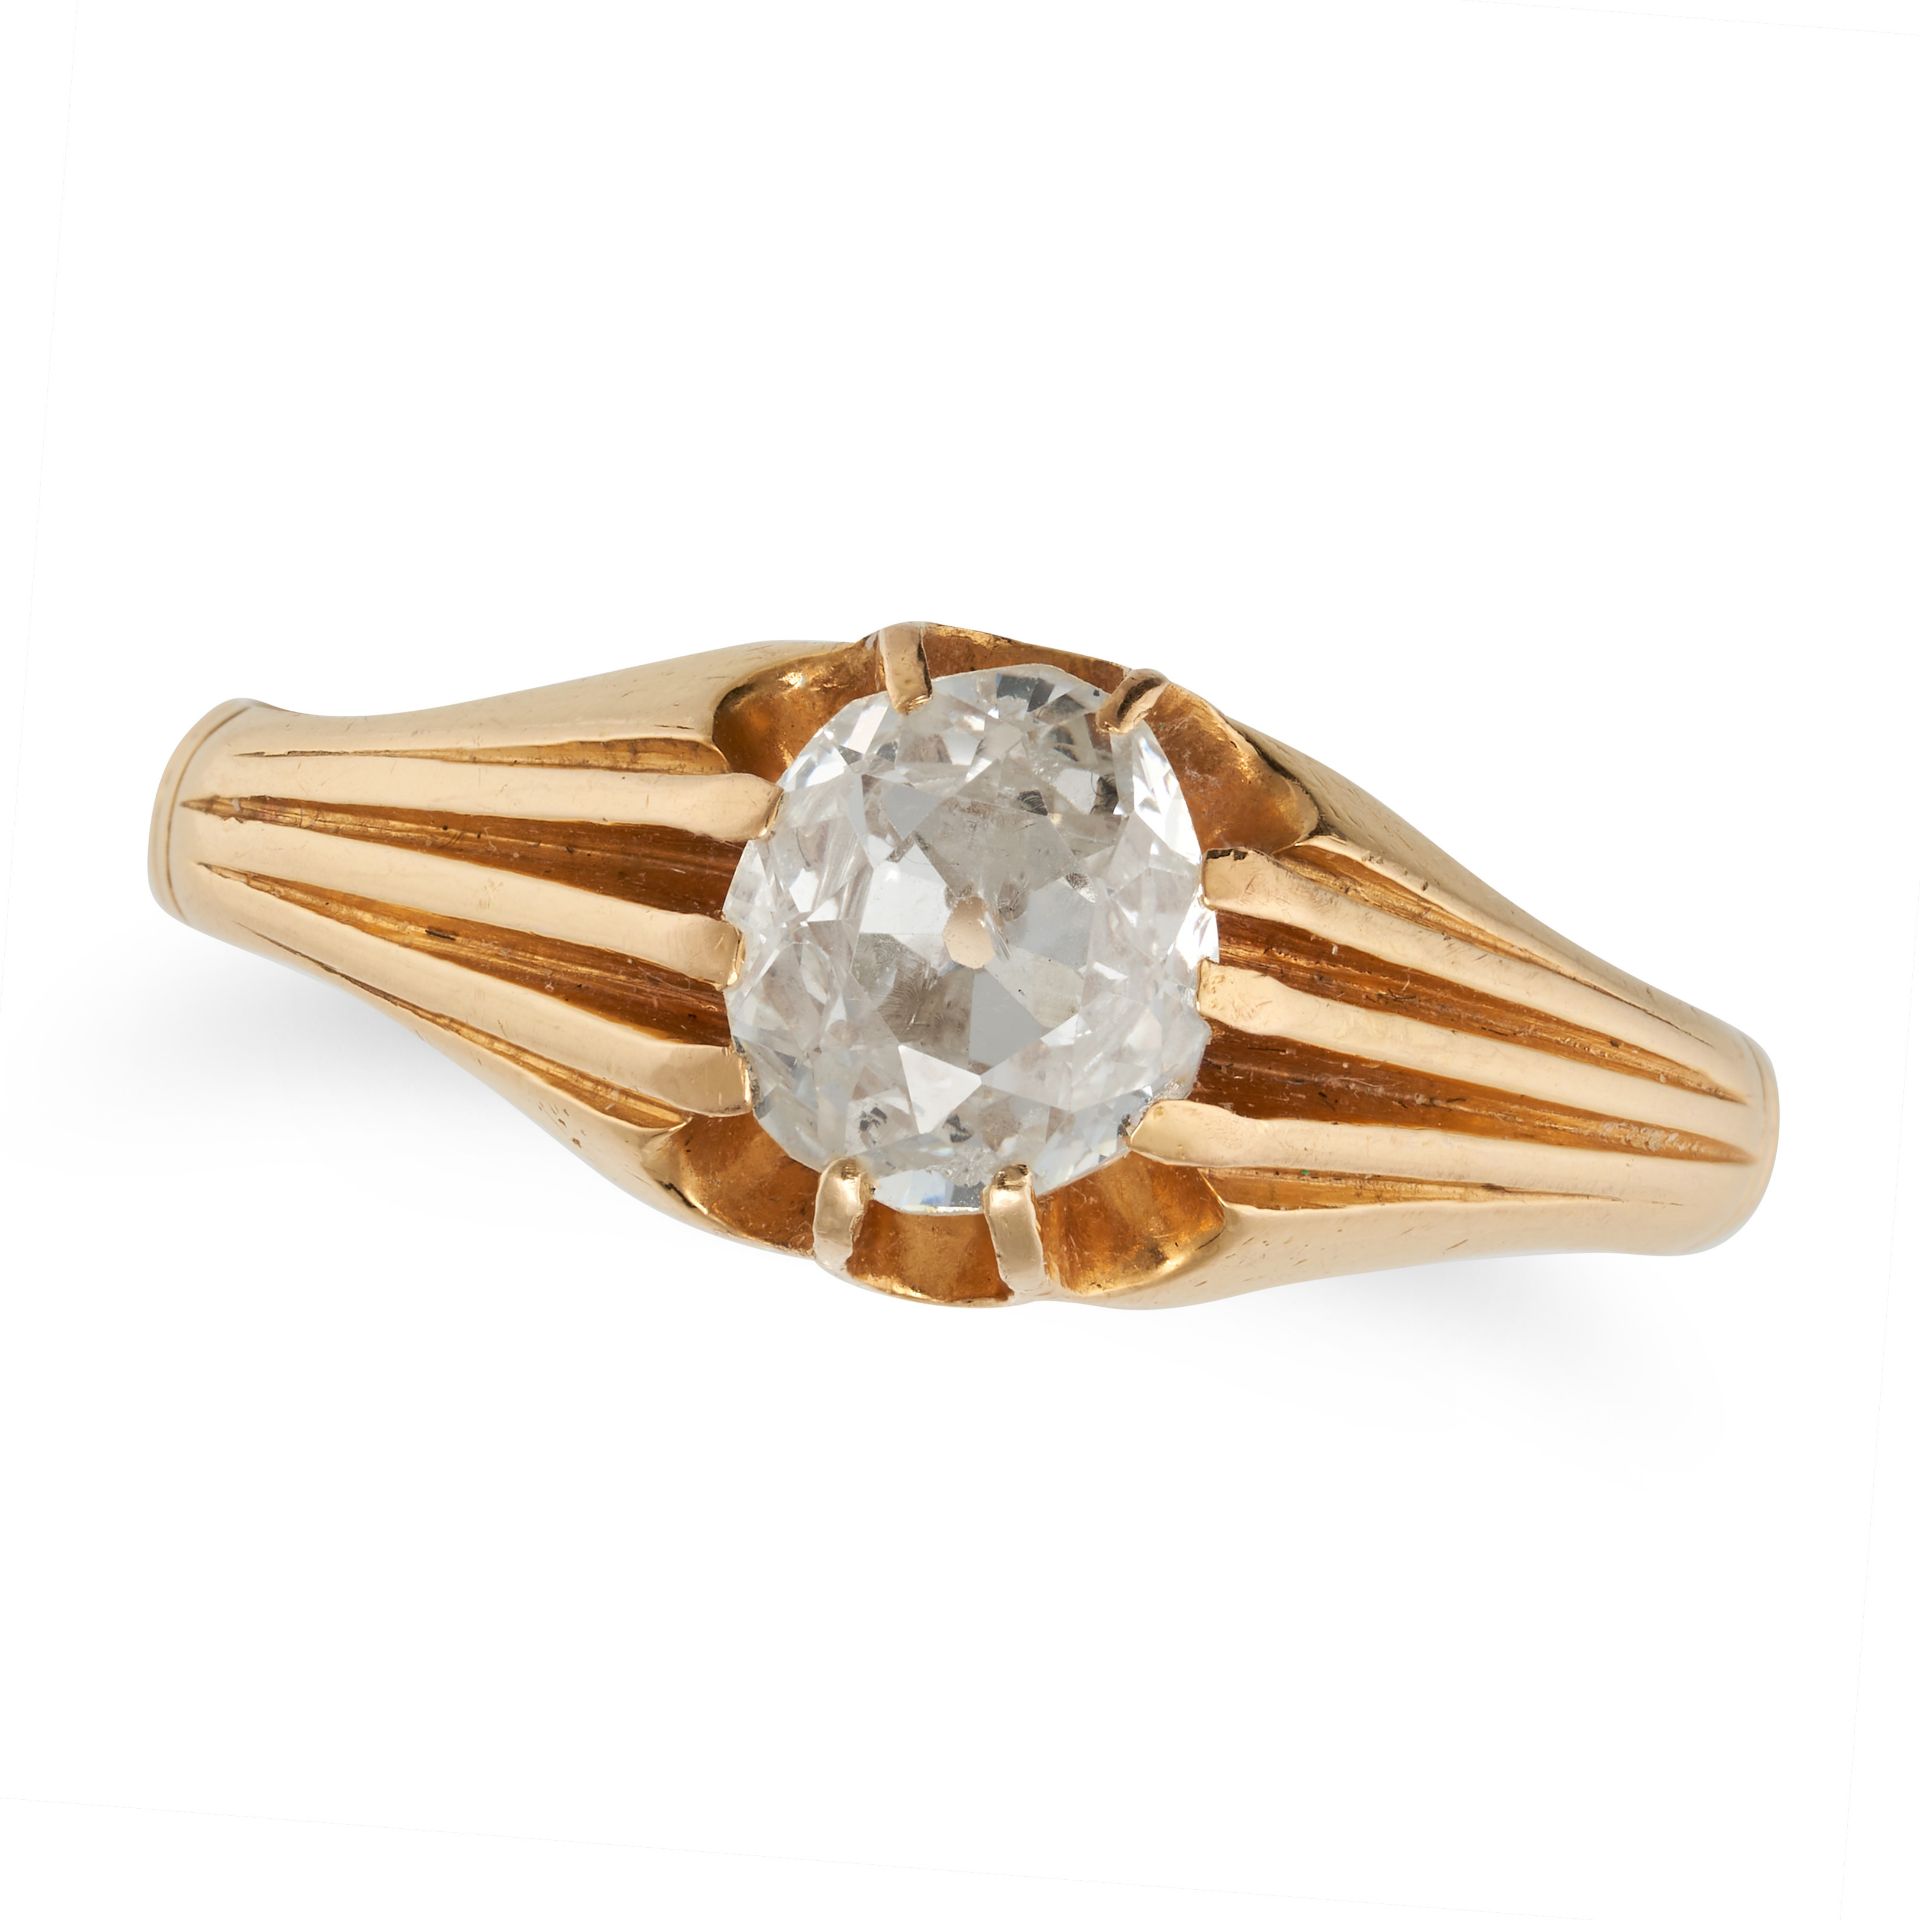 AN ANTIQUE SOLITAIRE DIAMOND RING in 18ct yellow gold, set with an old cut diamond of approximate...